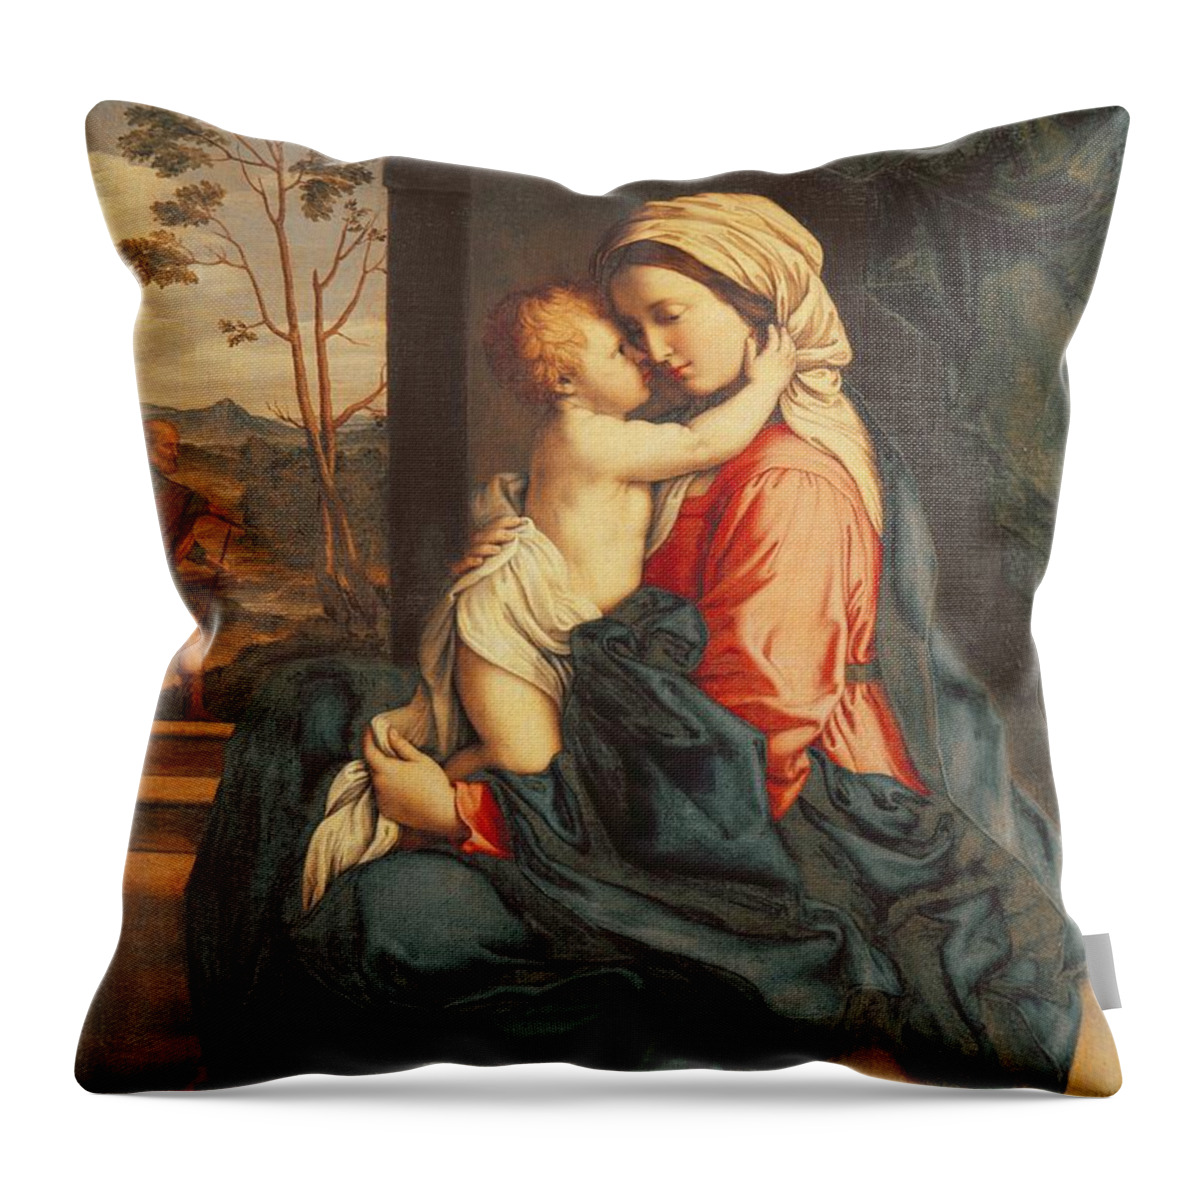 The Throw Pillow featuring the painting The Virgin and Child Embracing by Giovanni Battista Salvi